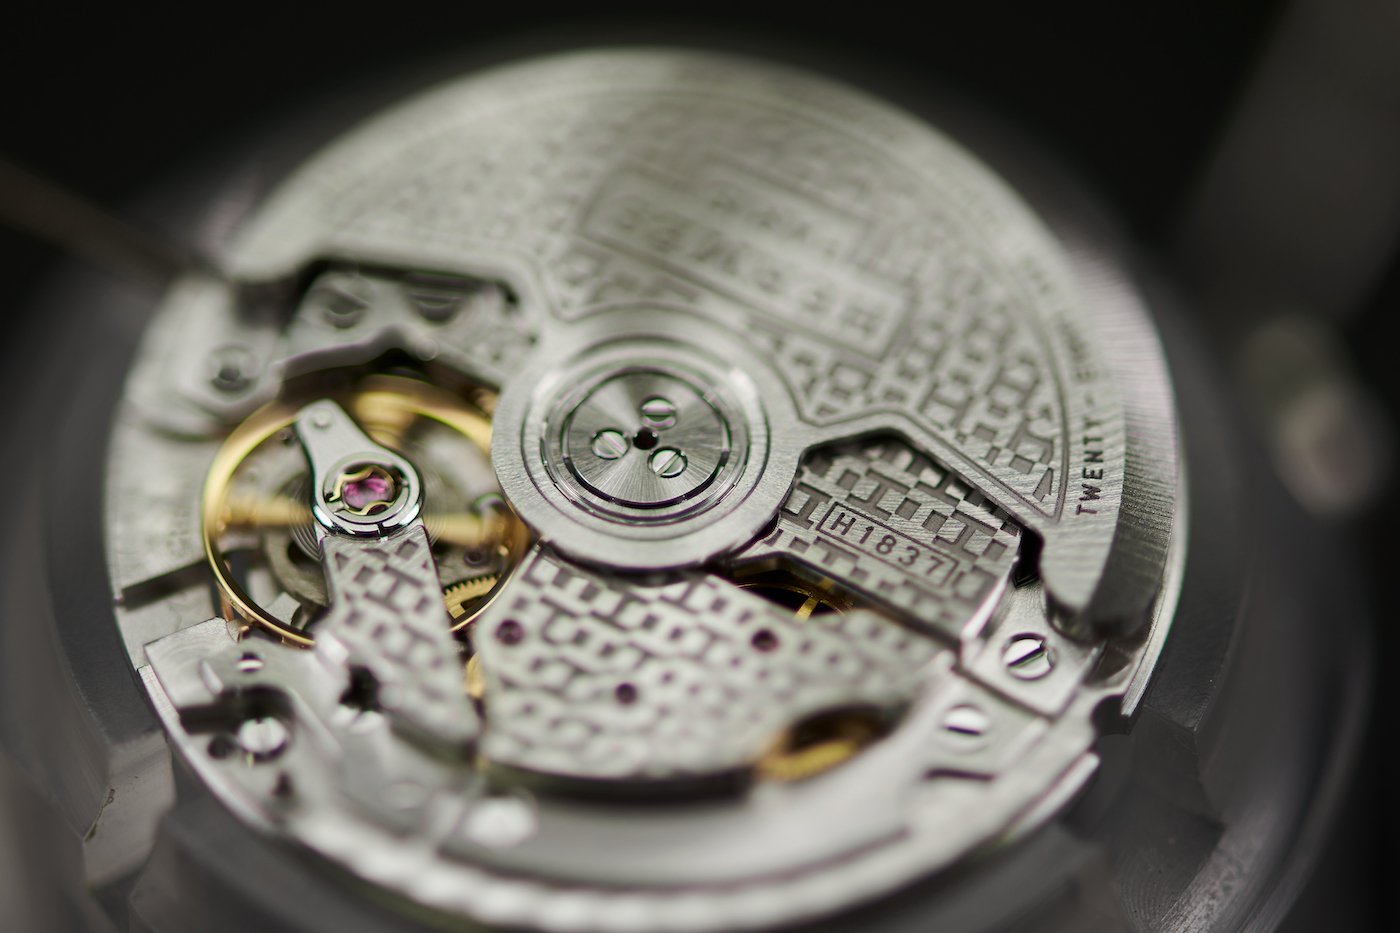 An introduction to the Hermès H08 watch